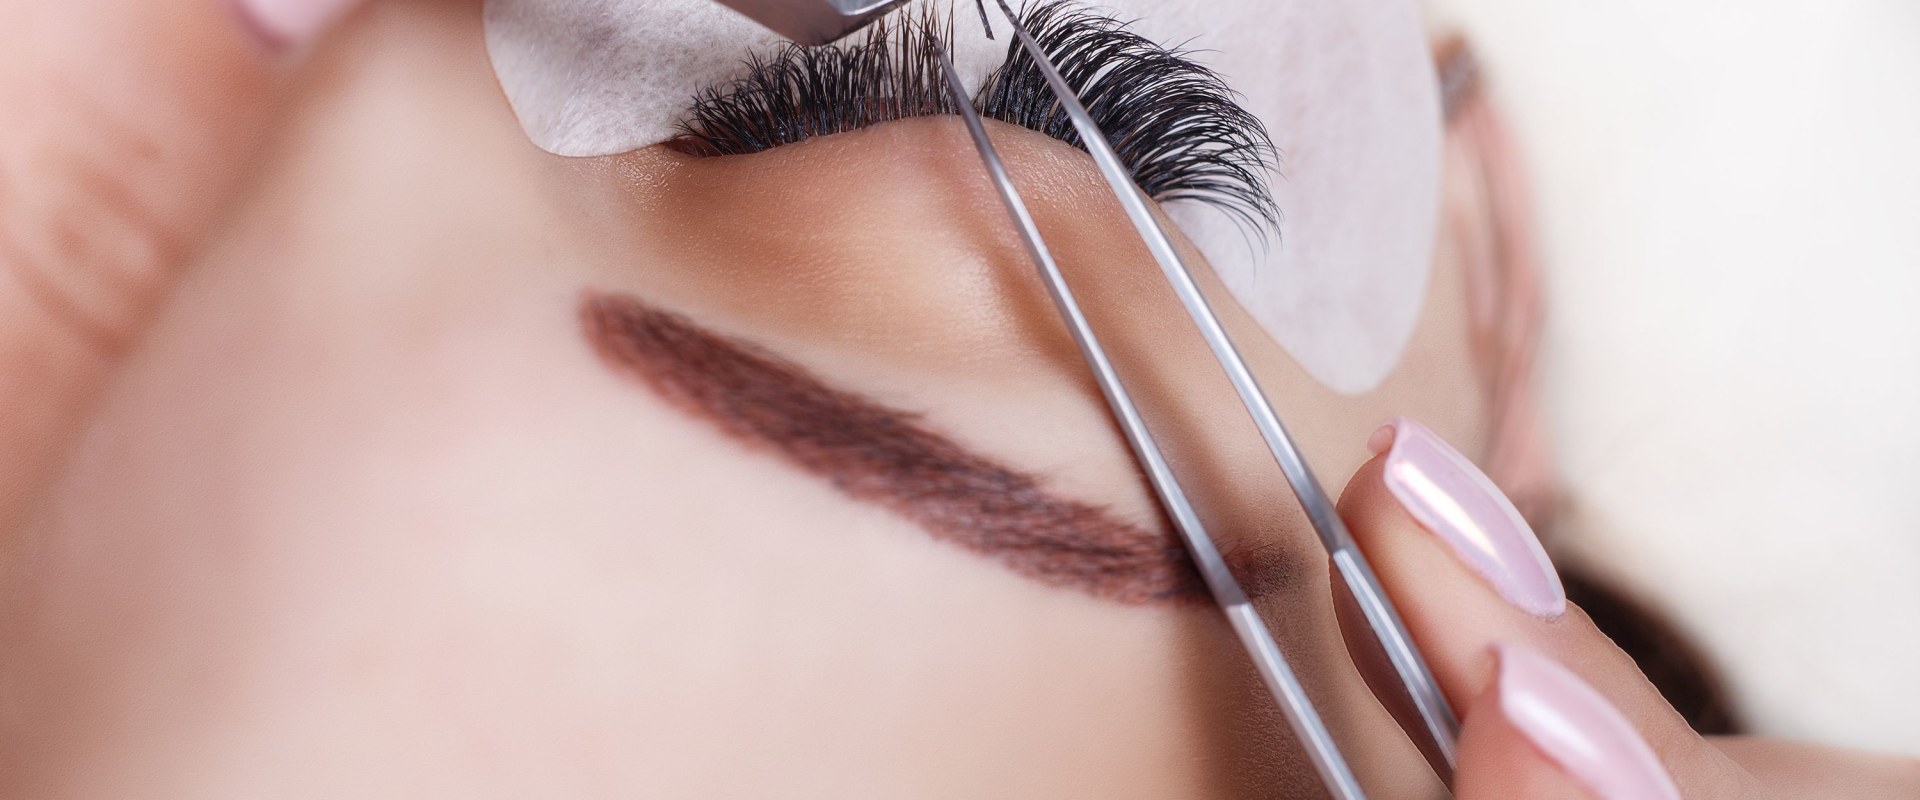 How long does it take for eyelash extensions to fall out naturally?